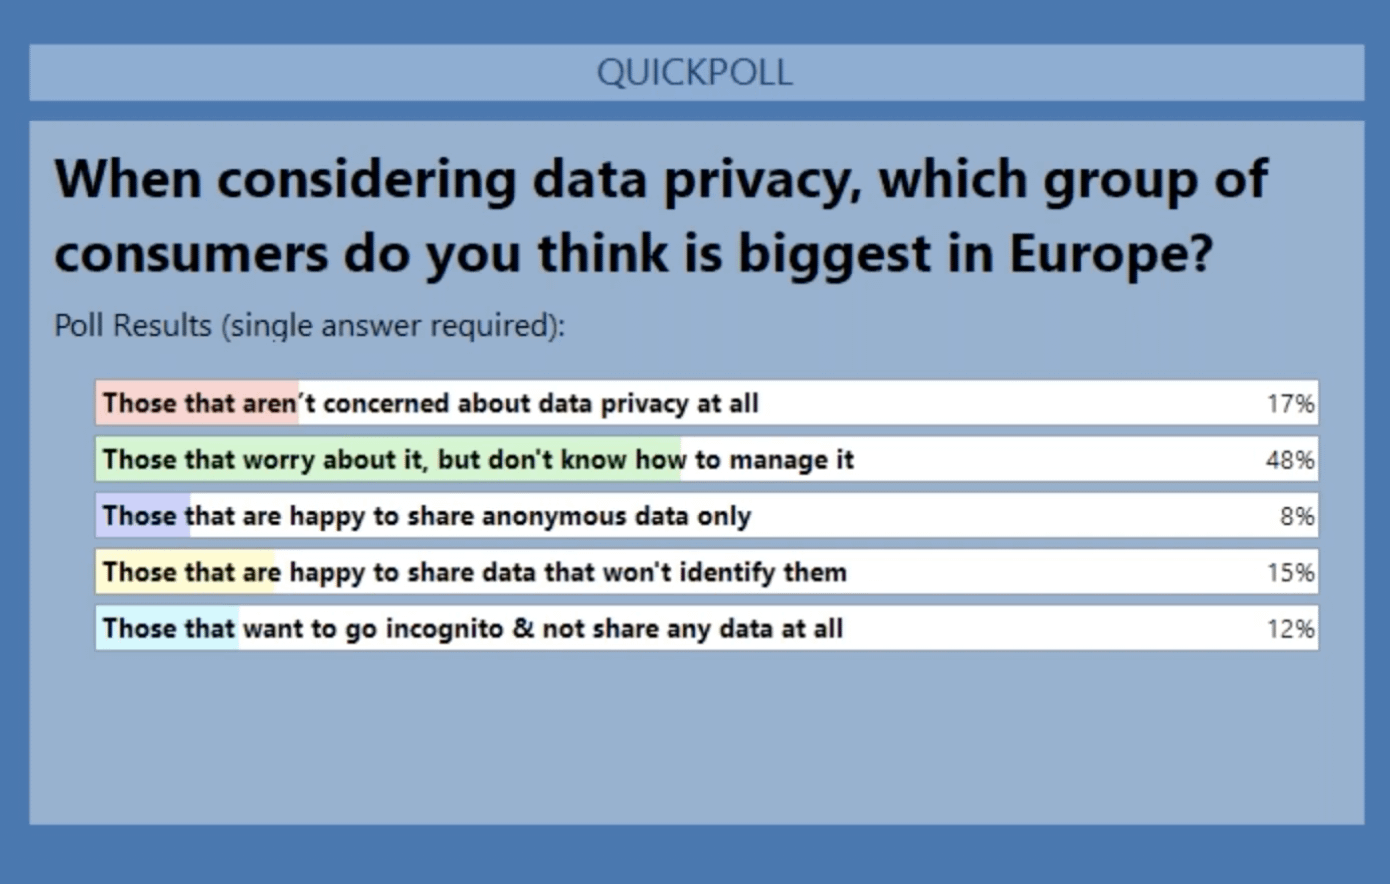 To what extent are European consumers concerned about data privacy? 